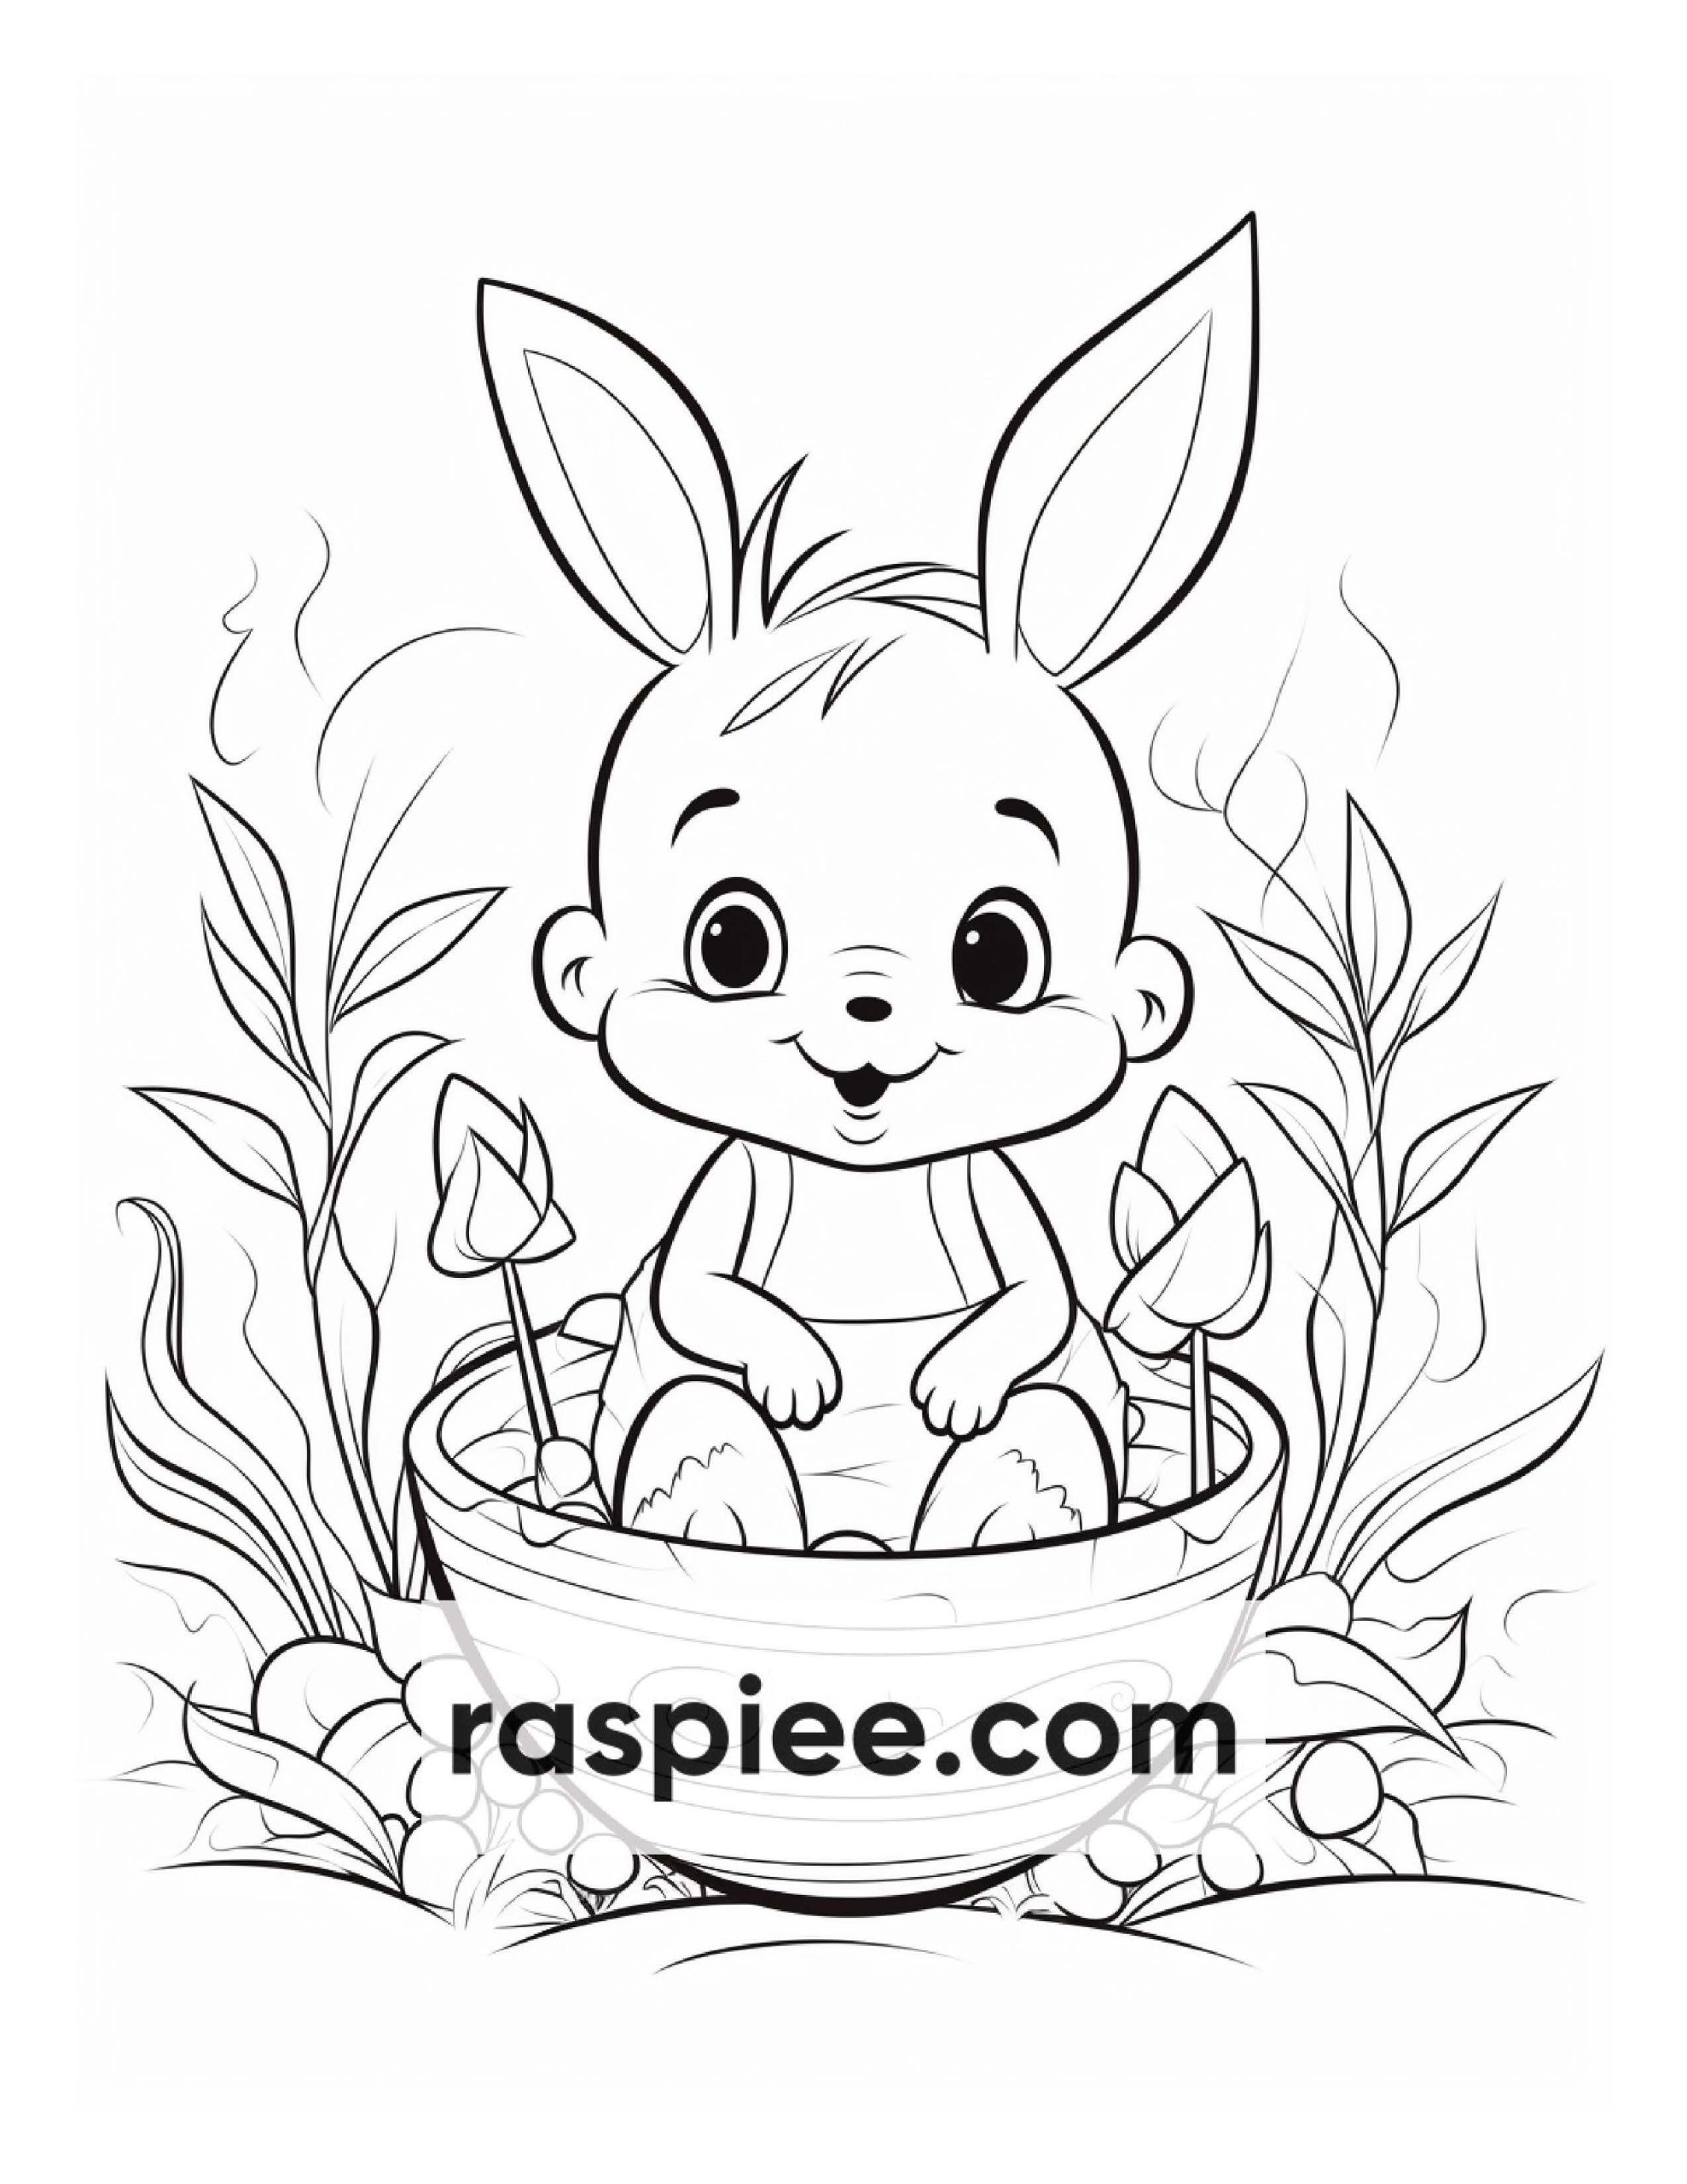 200 Easter Coloring Pages for Kids, Preschool Printable Activities, Instant Download